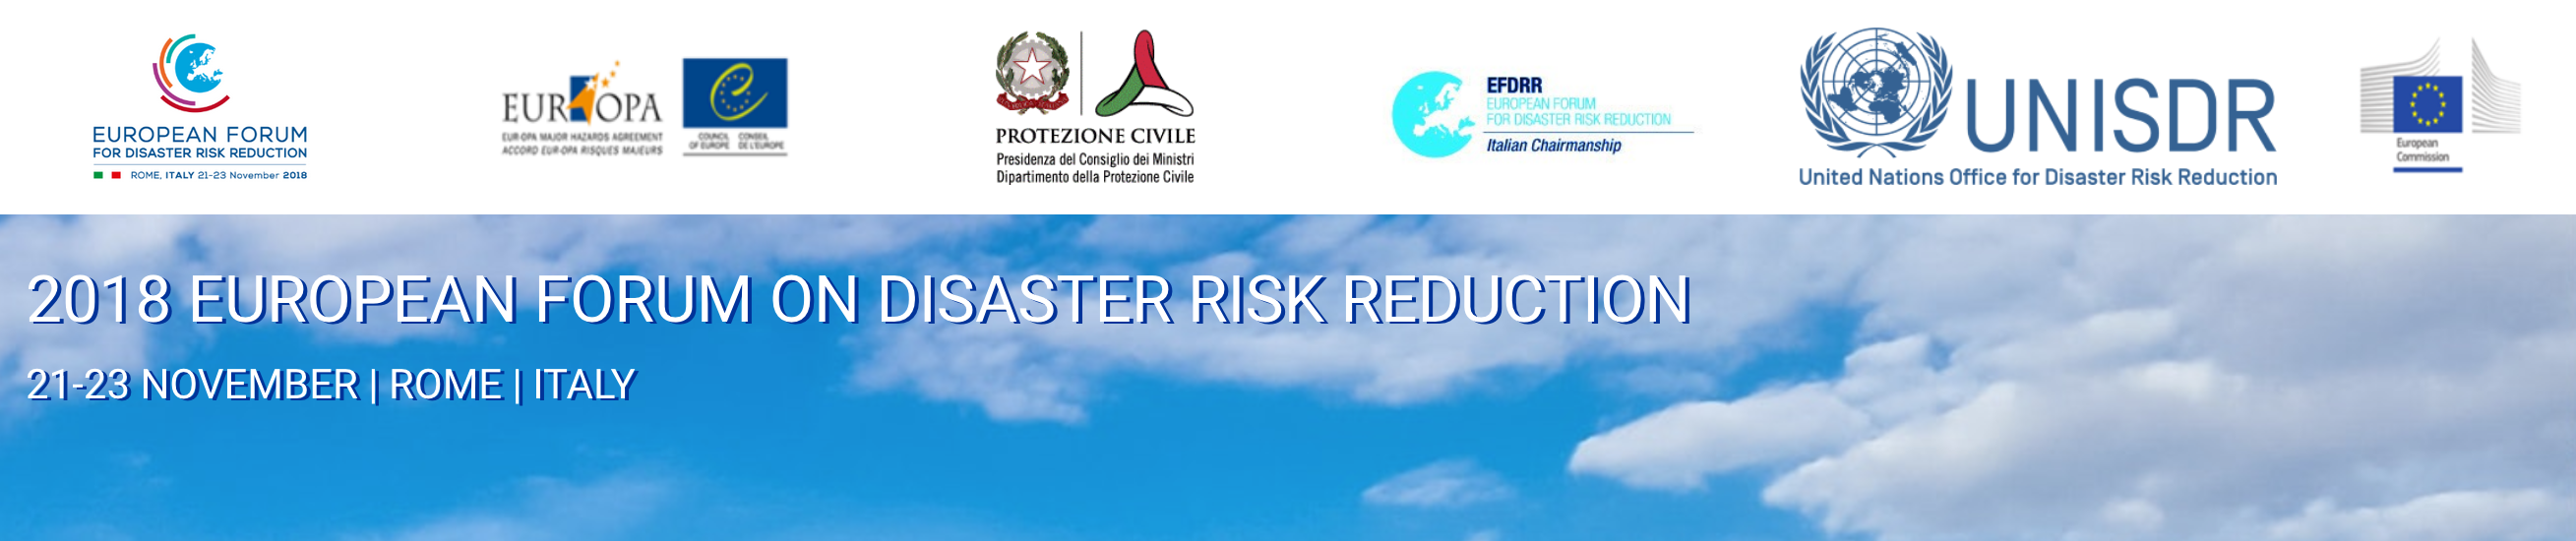 The European Forum for Distaster Risk Reduction  addresses Cultural Heritage: Resilience and Risk Reduction